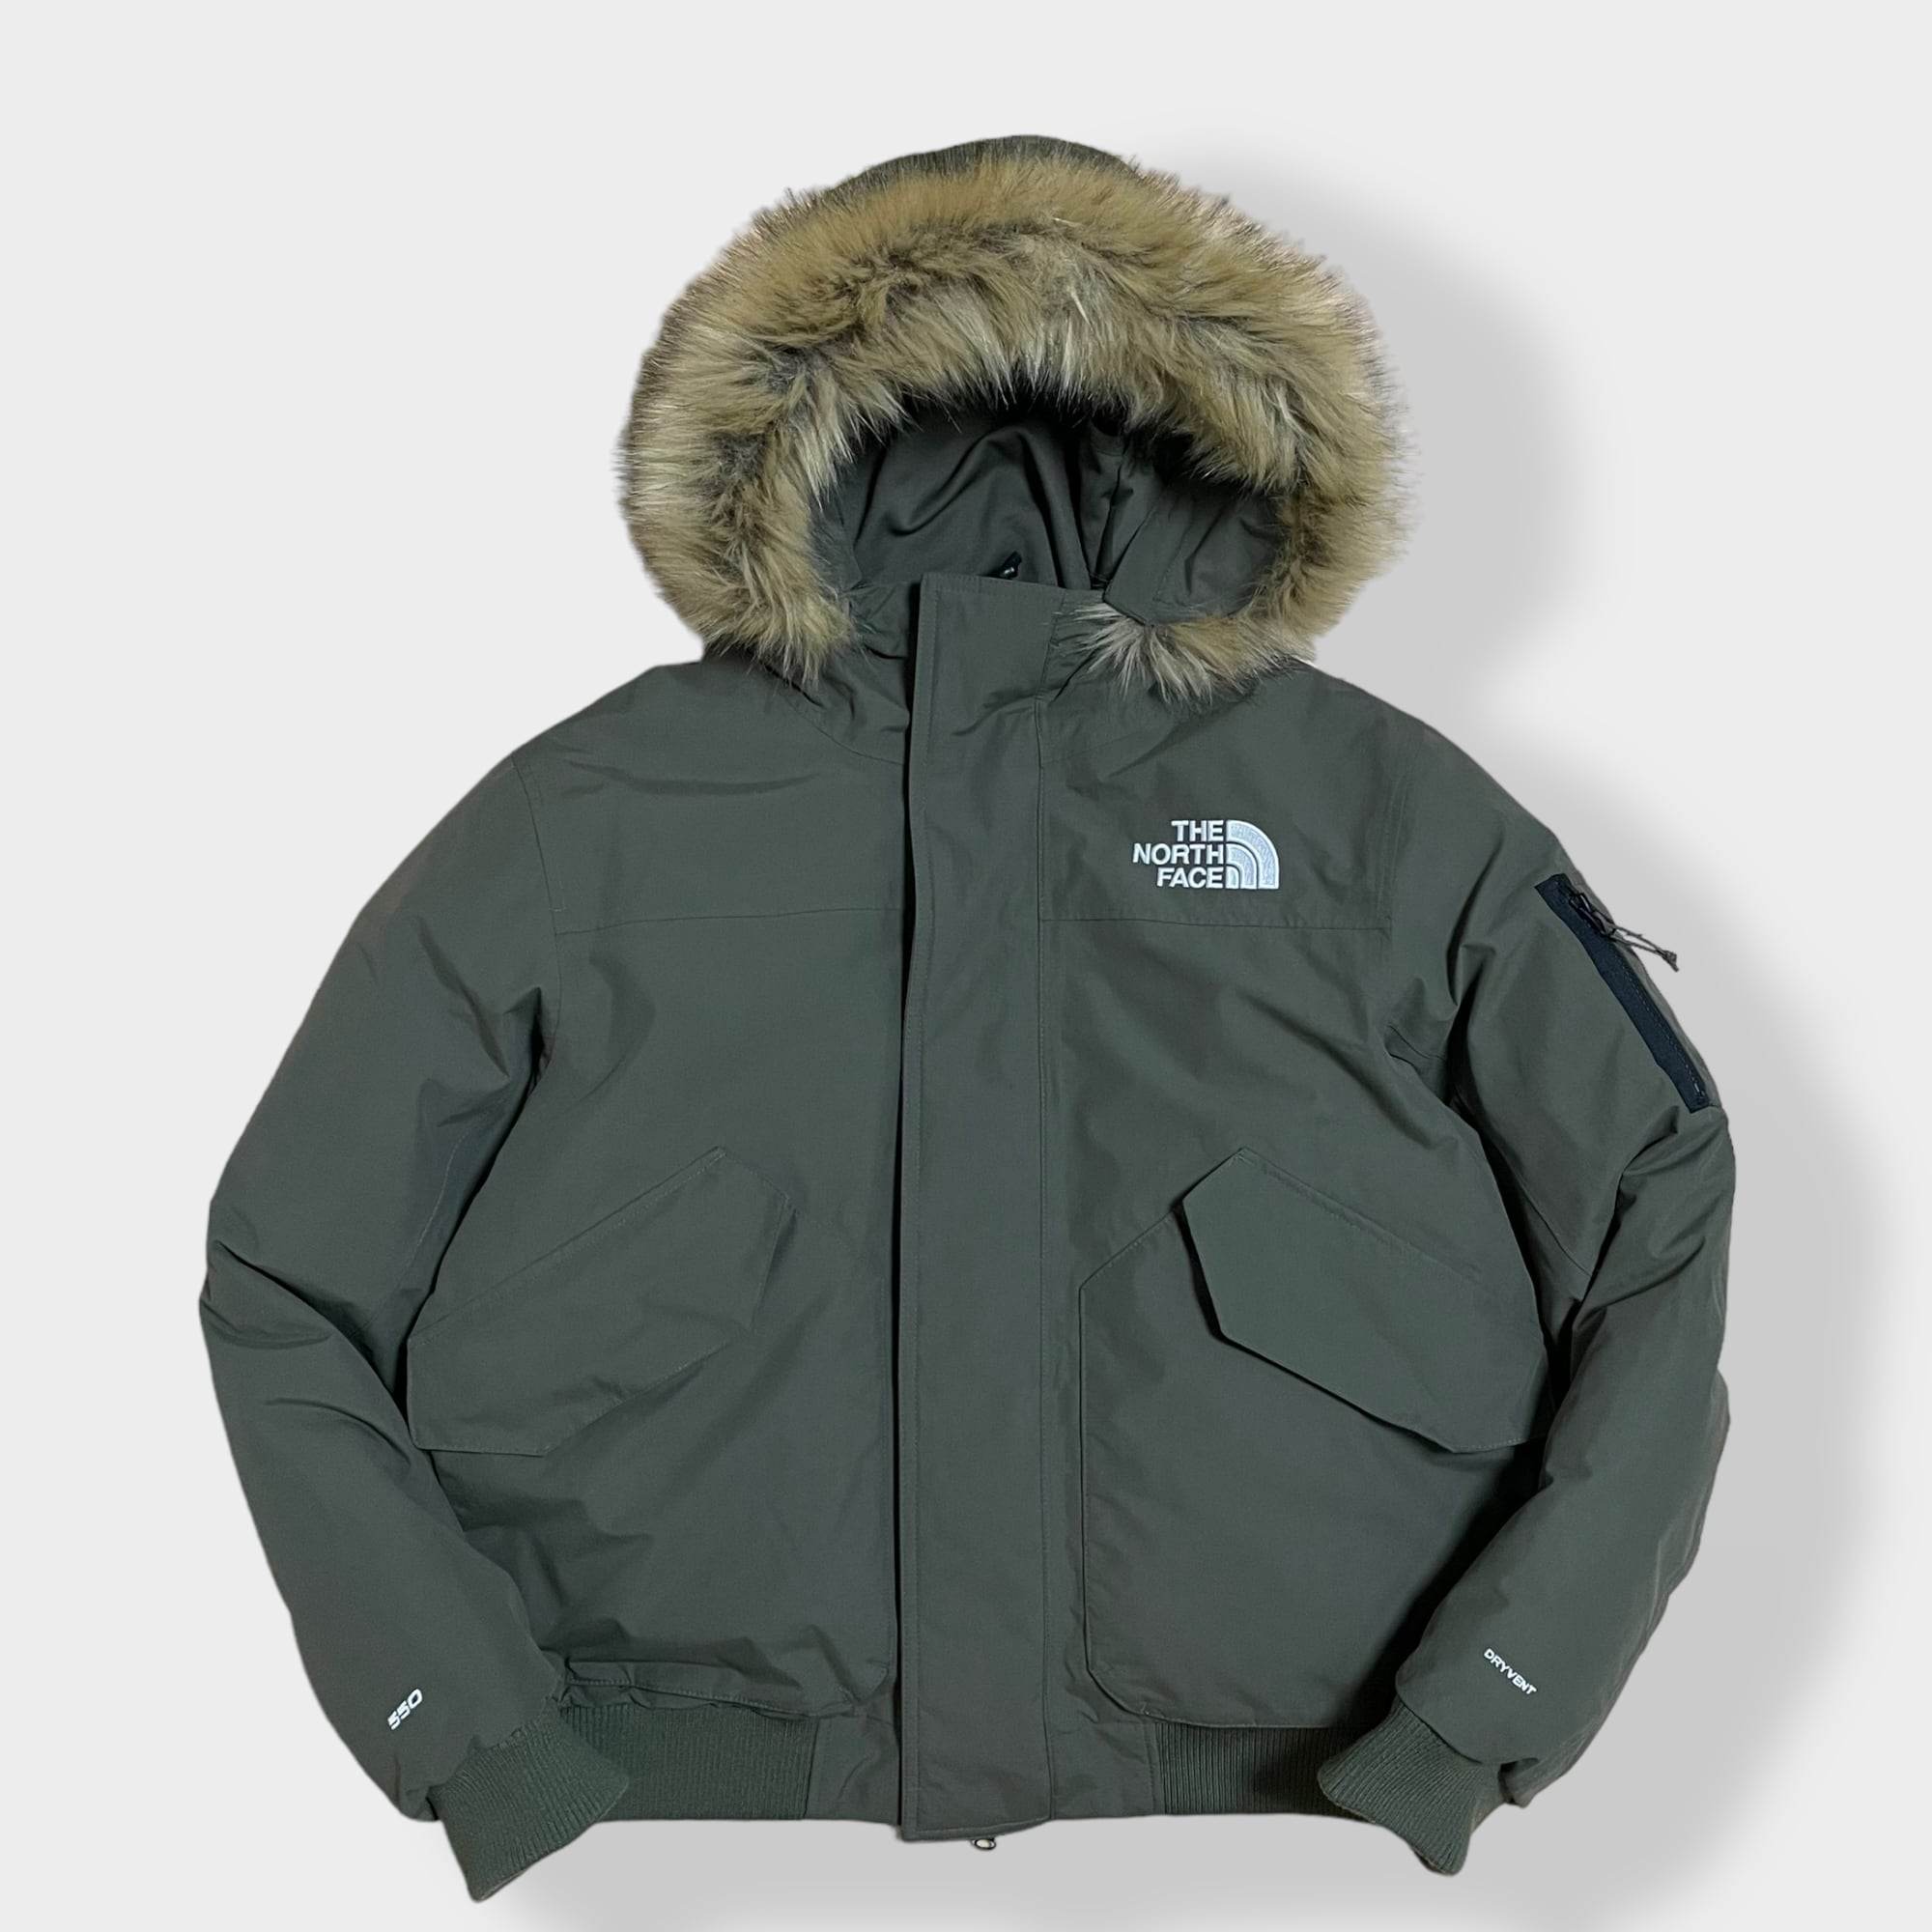 THE NORTH FACE】 STOVER JACKET グースダウン 550フィル US限定 日本 ...